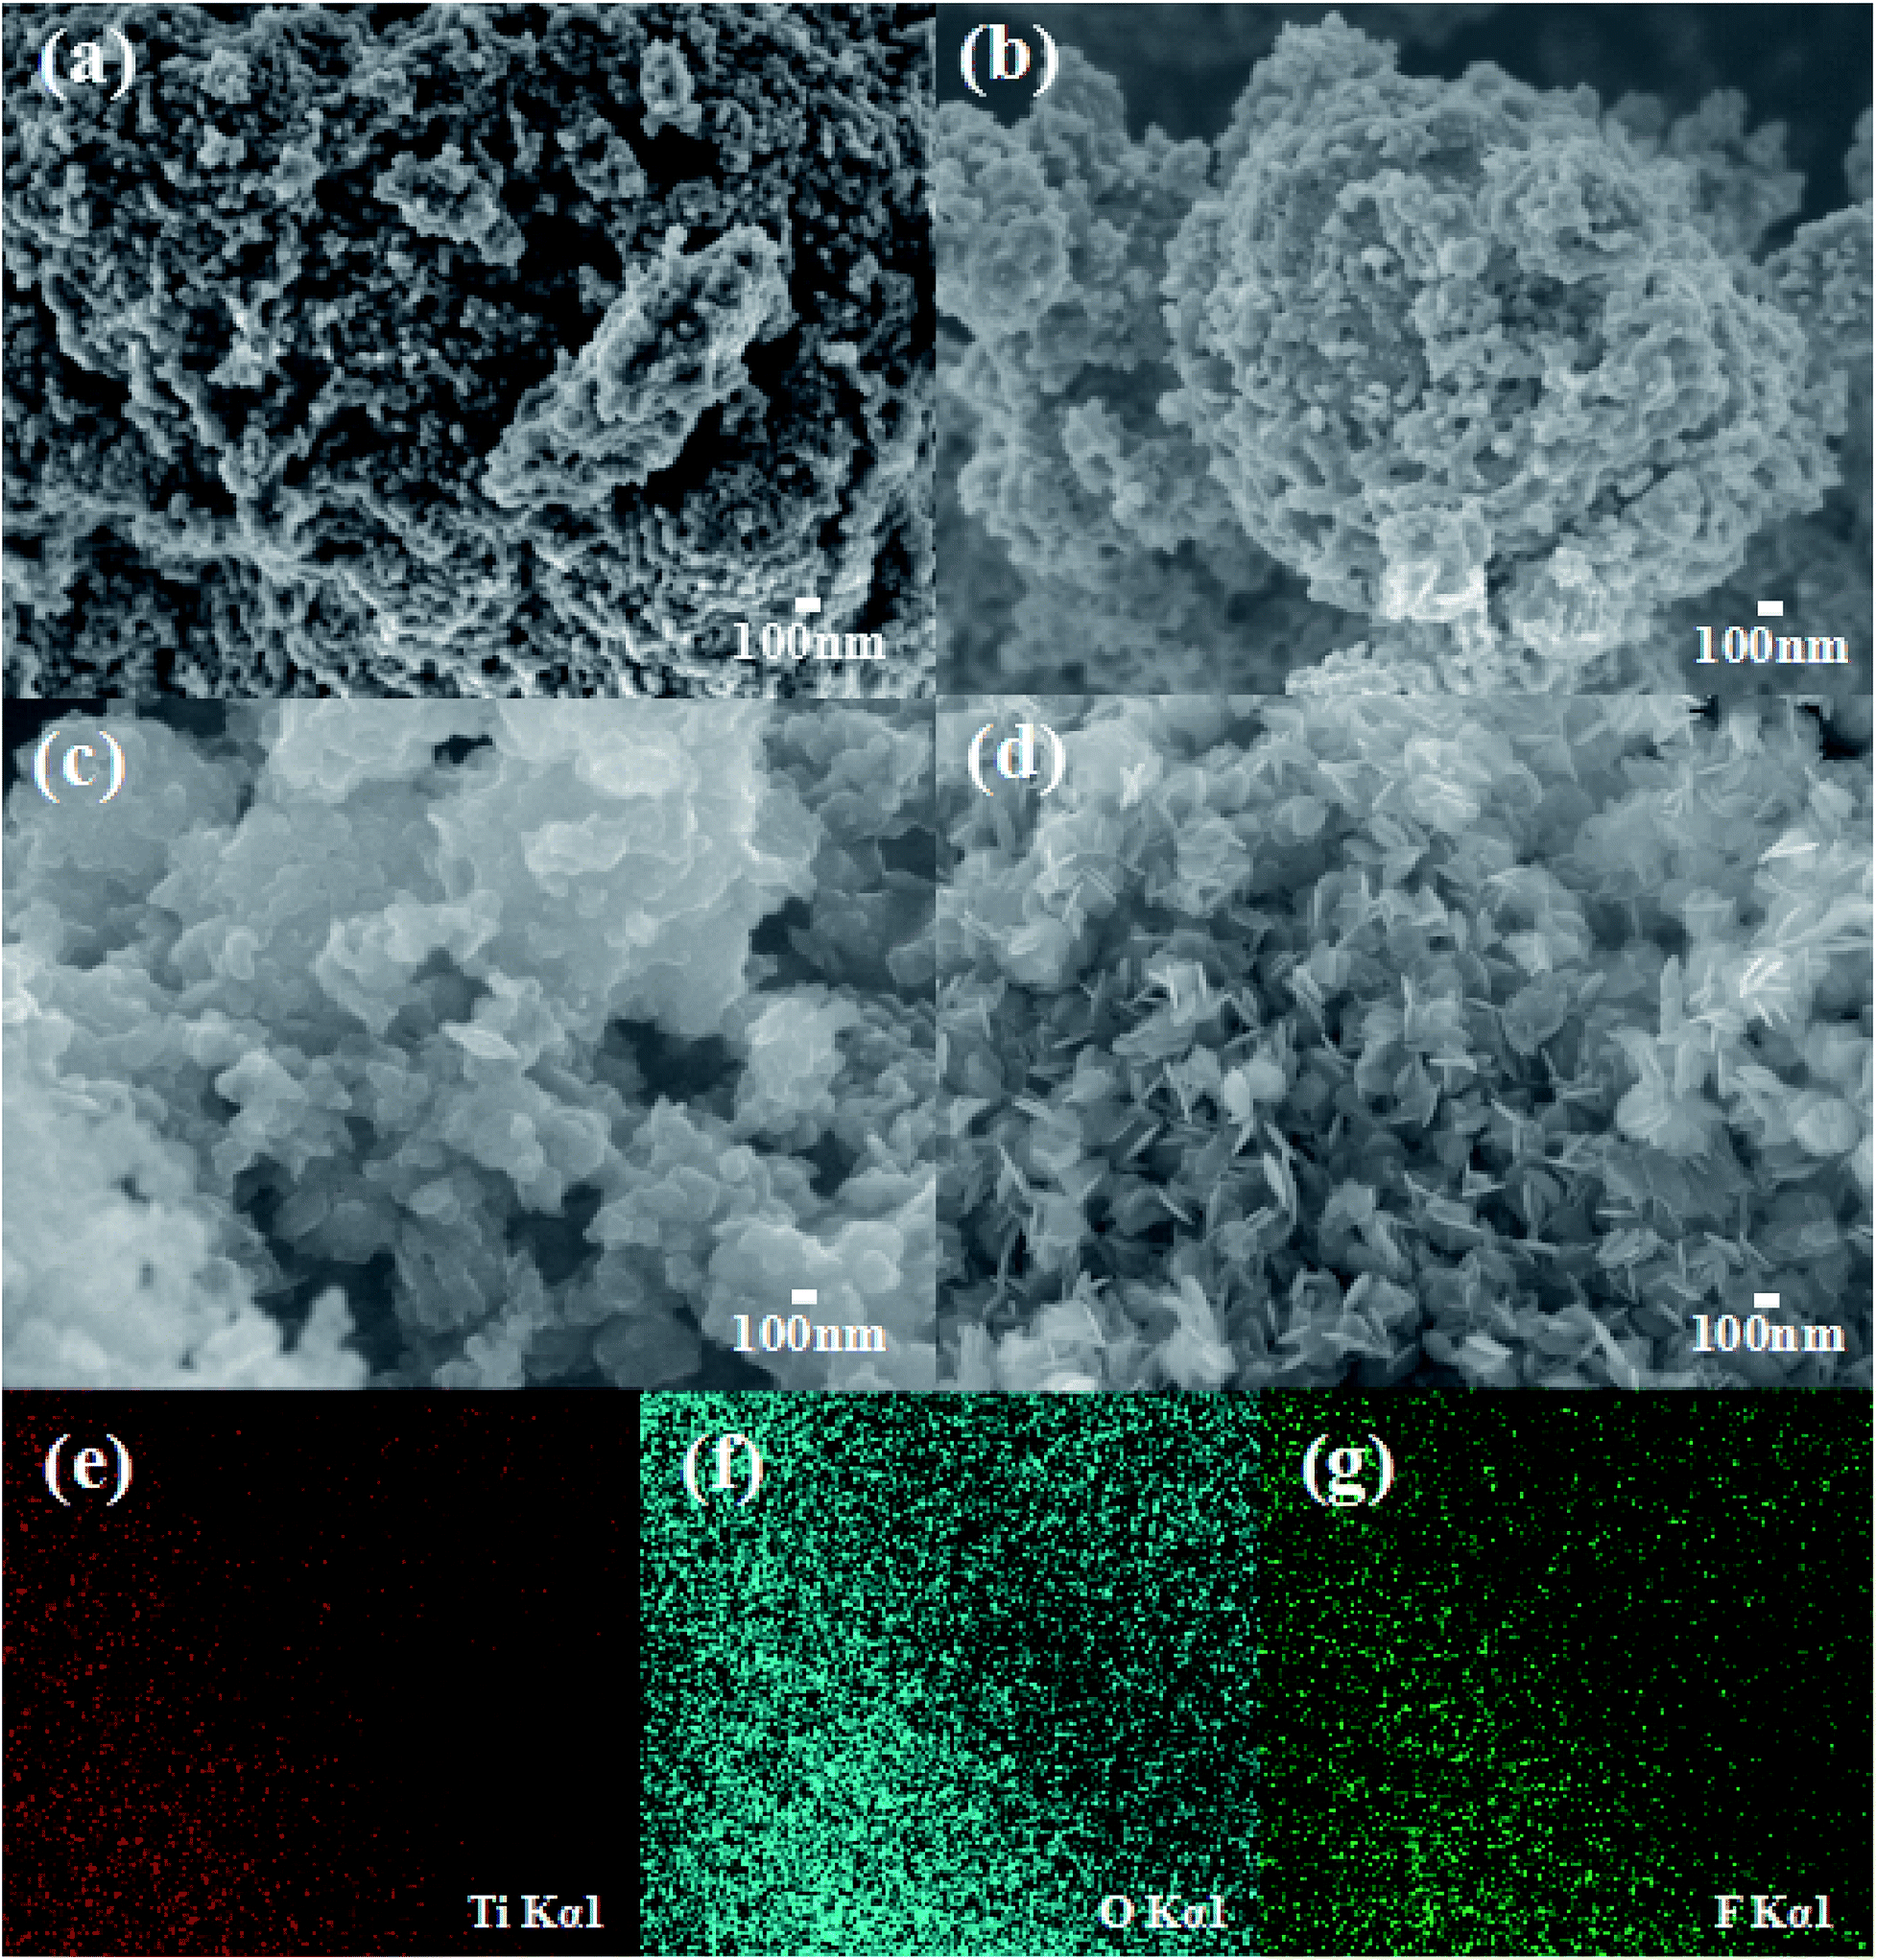 Transformation Of Novel Tiof 2 Nanoparticles To Cluster Tio 2 001 101 And Its Degradation Of Tetracycline Hydrochloride Under Simulated Sunlight Rsc Advances Rsc Publishing Doi 10 1039 D0raj